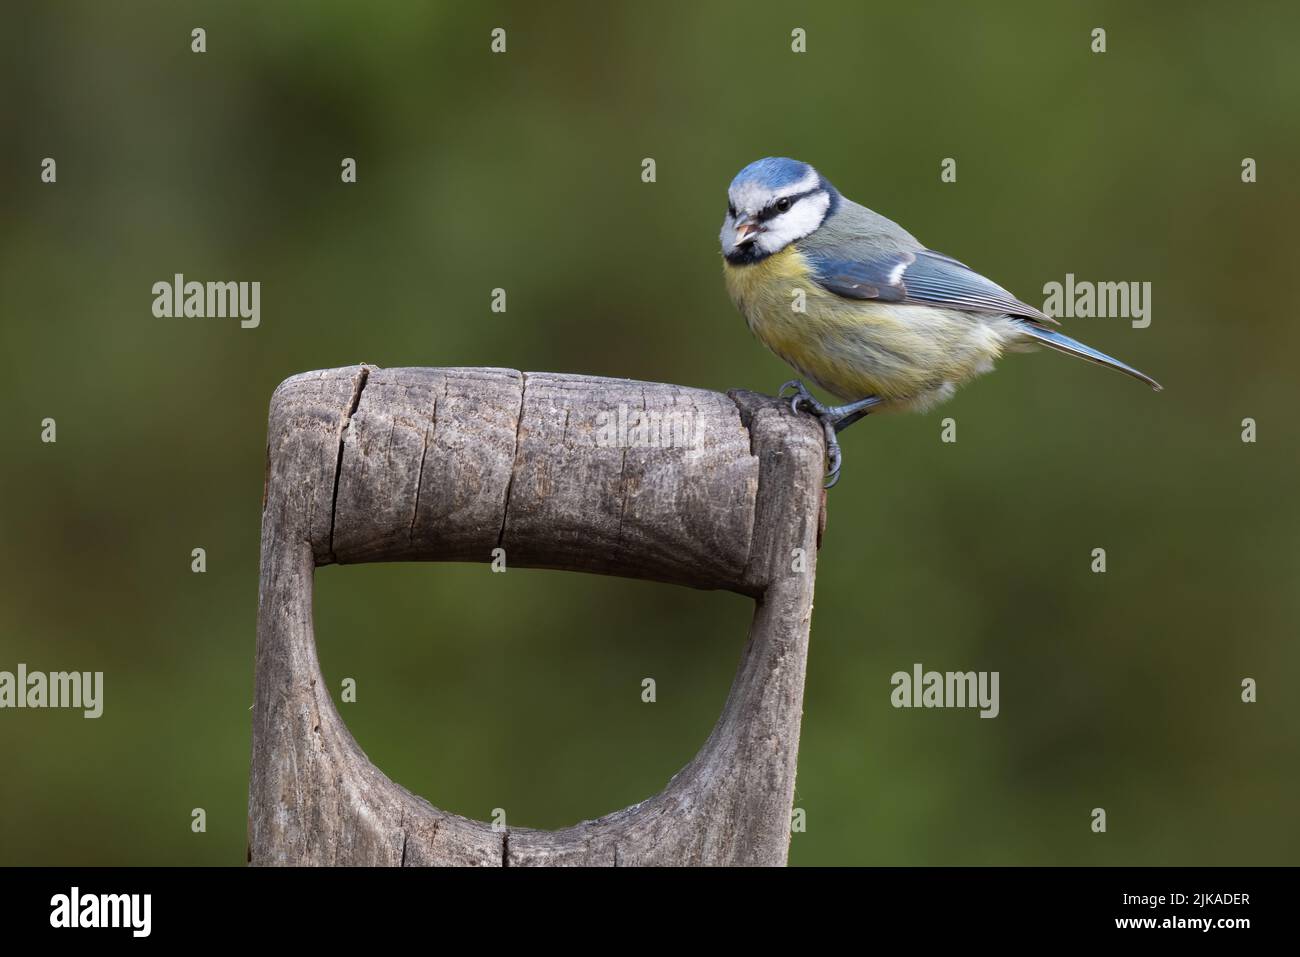 a blue tit, Cyanistes caeruleus, as it is perched on an old wooden garden fork handle. Stock Photo